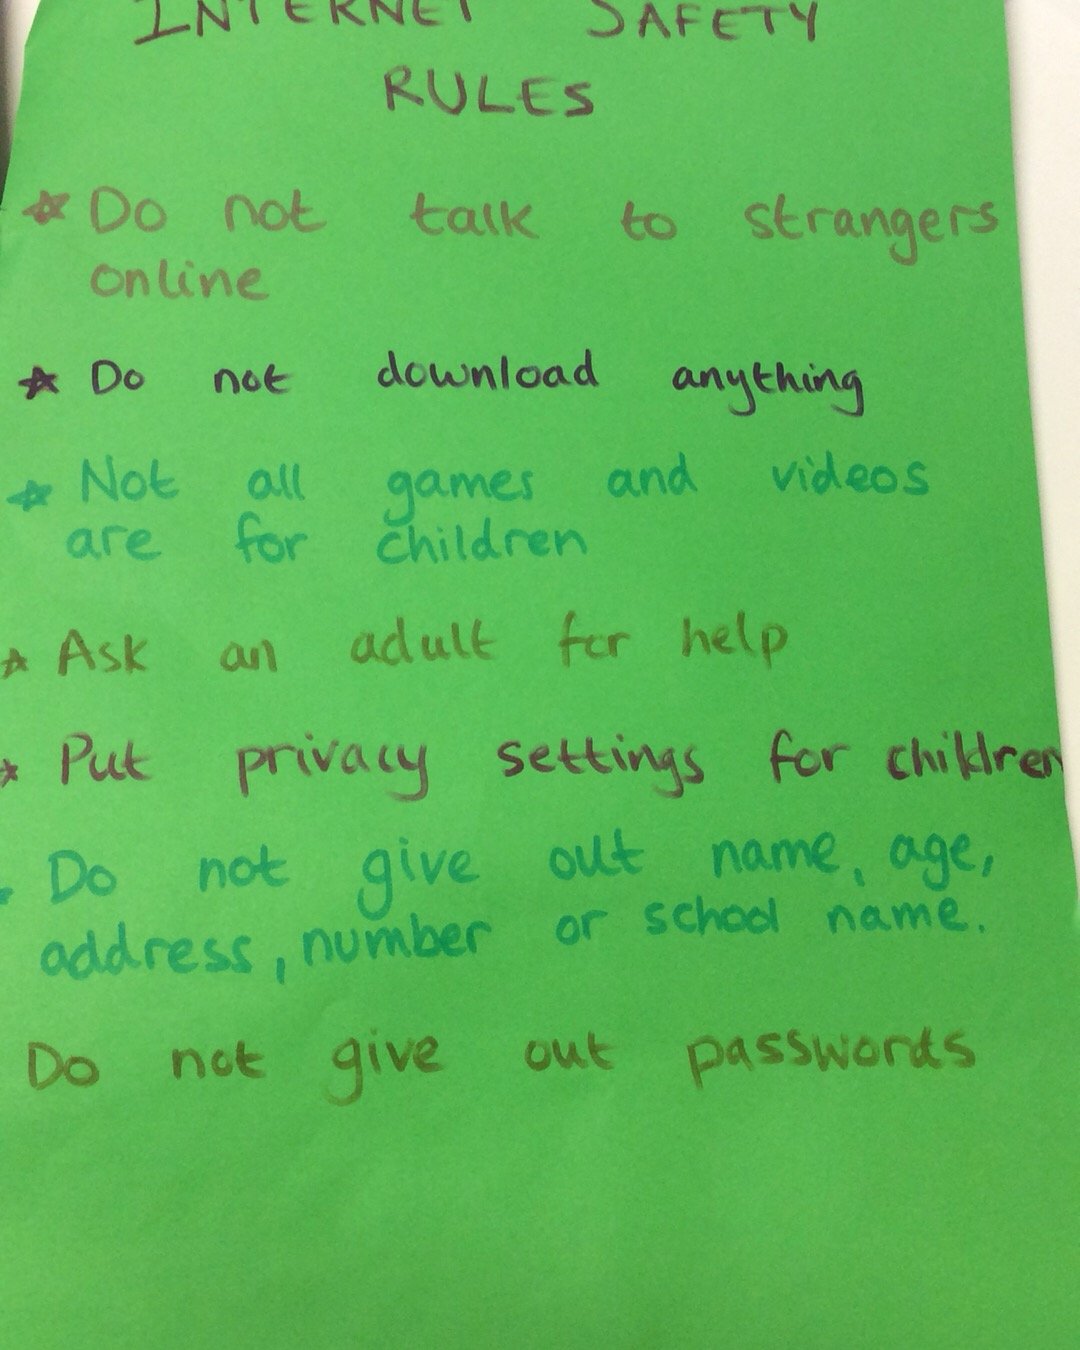 PSHE and ICT - Our Rules For Staying Safe Online!